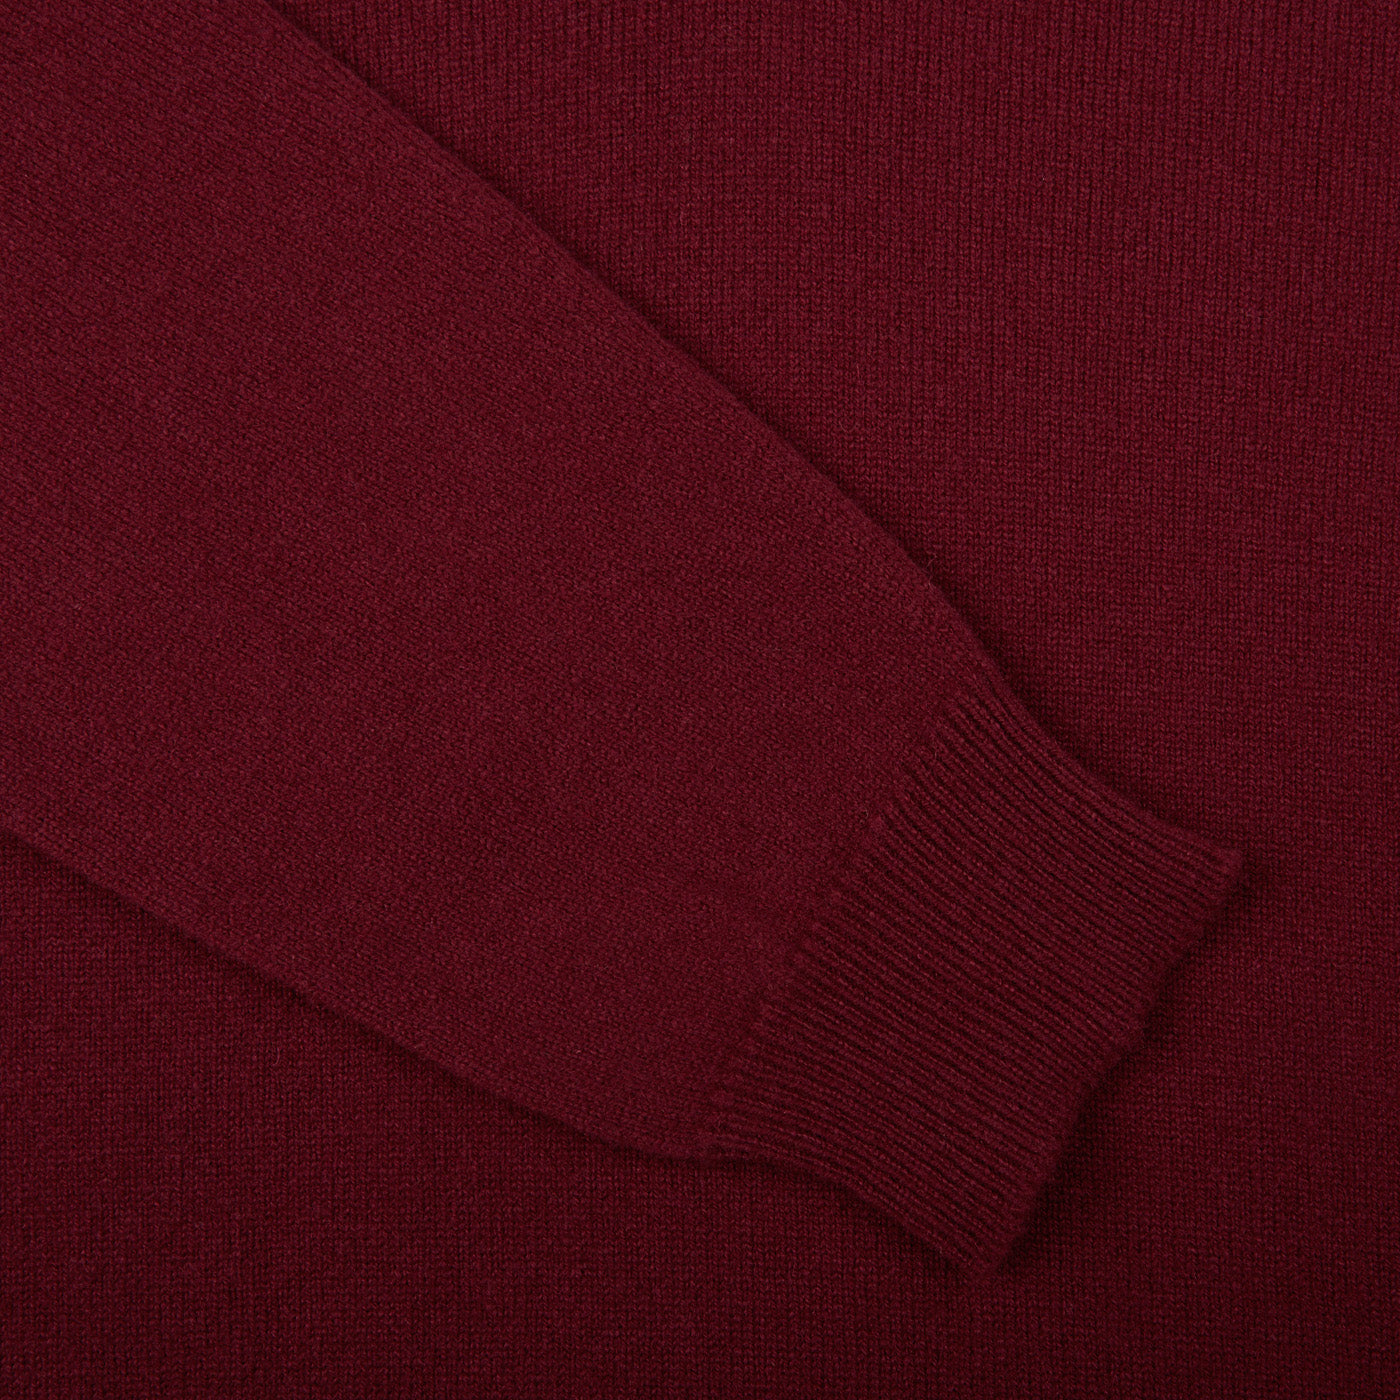 A close up of a William Lockie Bordeaux V-Neck Lambswool Sweater.